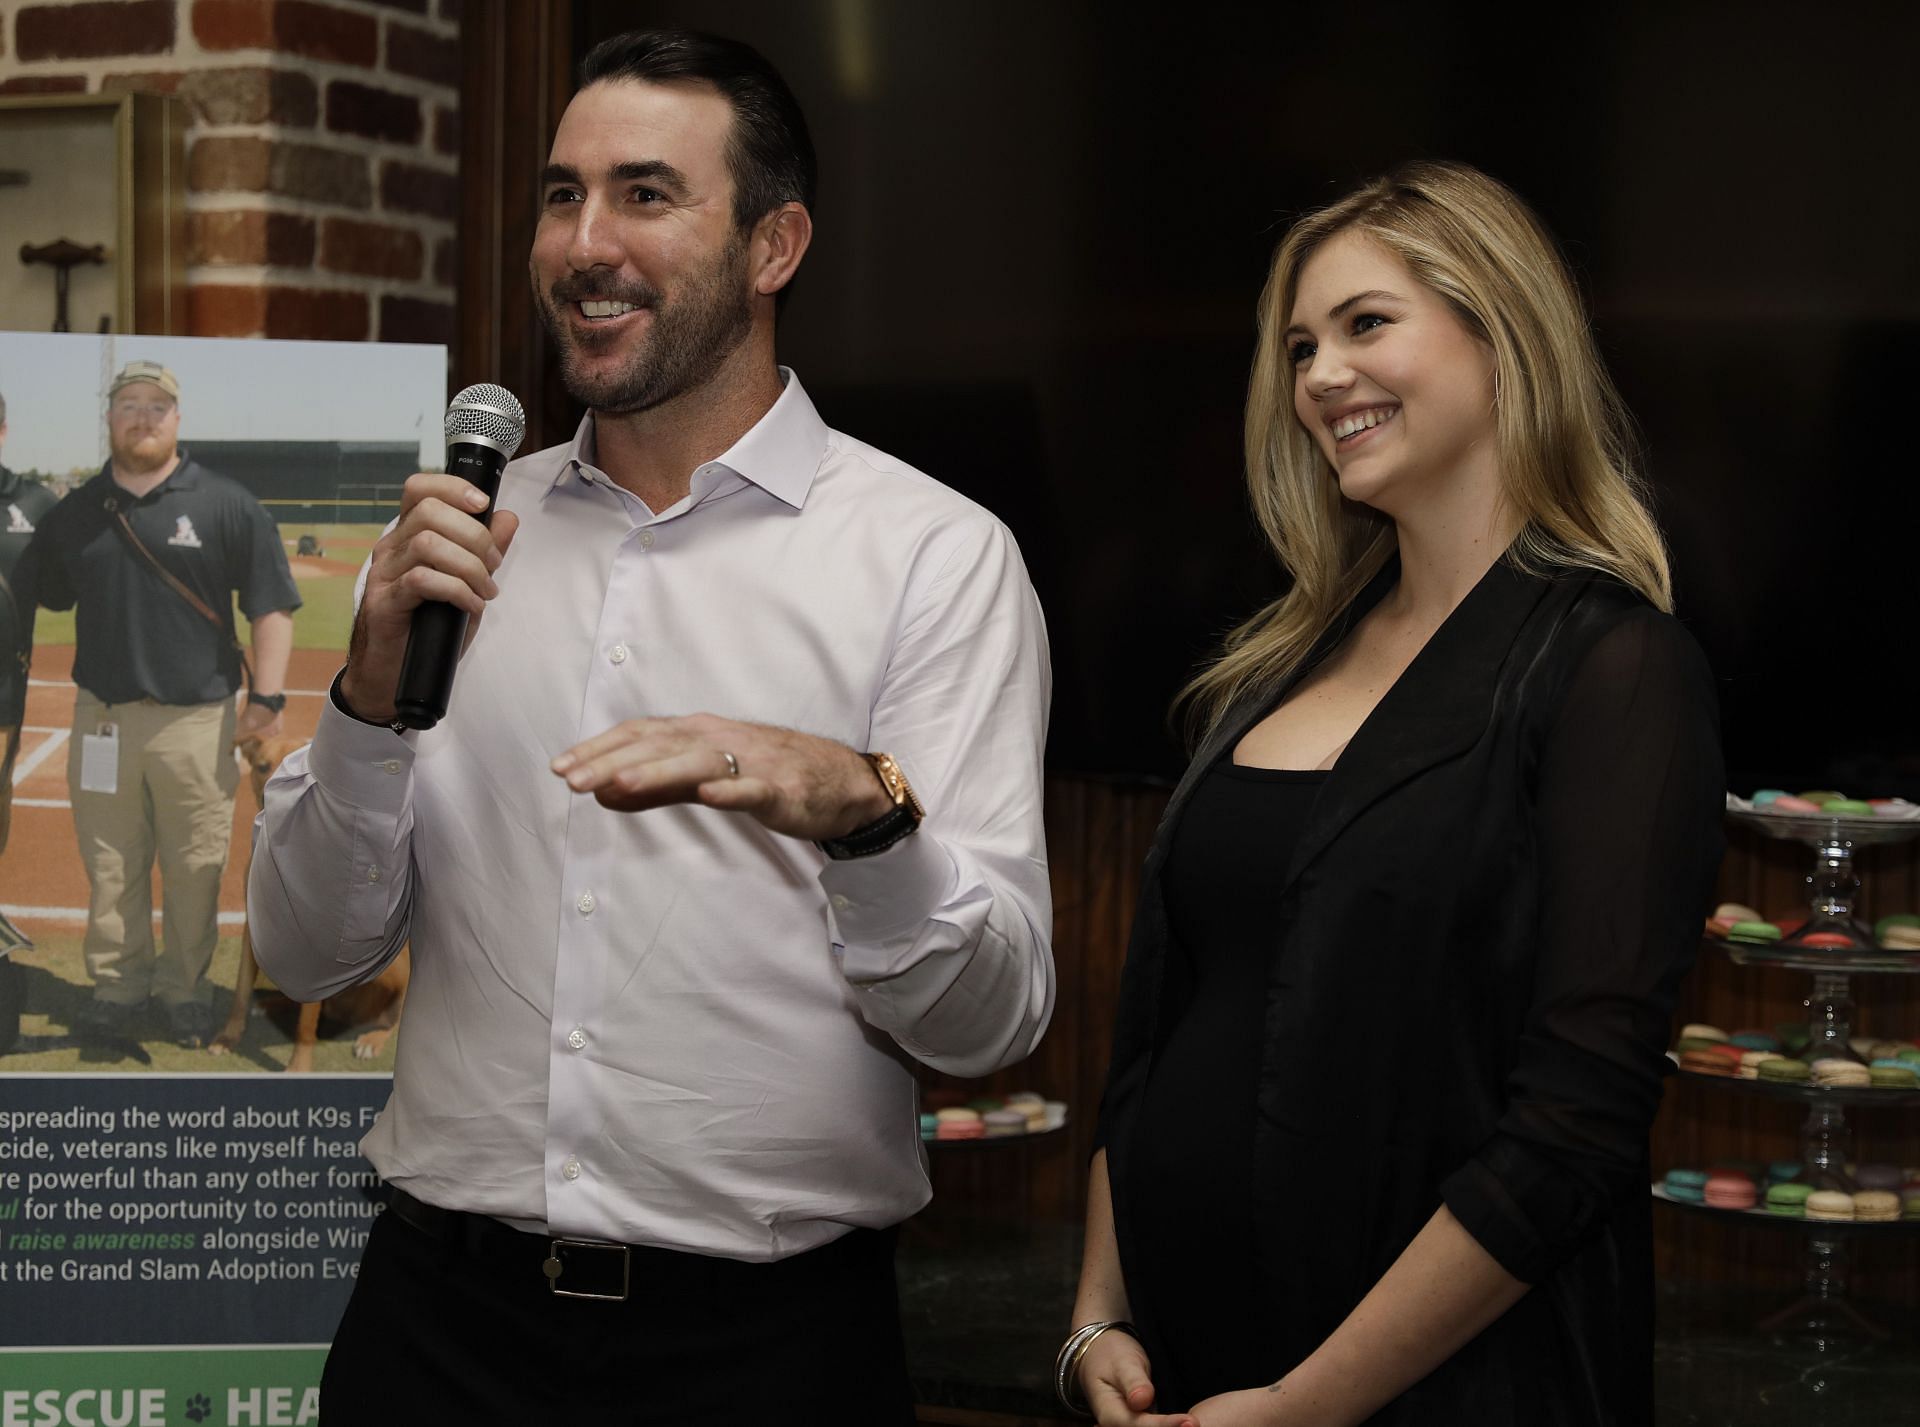 Kate Upton &amp; Justin Verlander Host Reception For Grand Slam Adoption Event And Wins For Warriors Foundation To Raise Funds For Adoptable Dogs To Become Service Animals For Military Veterans